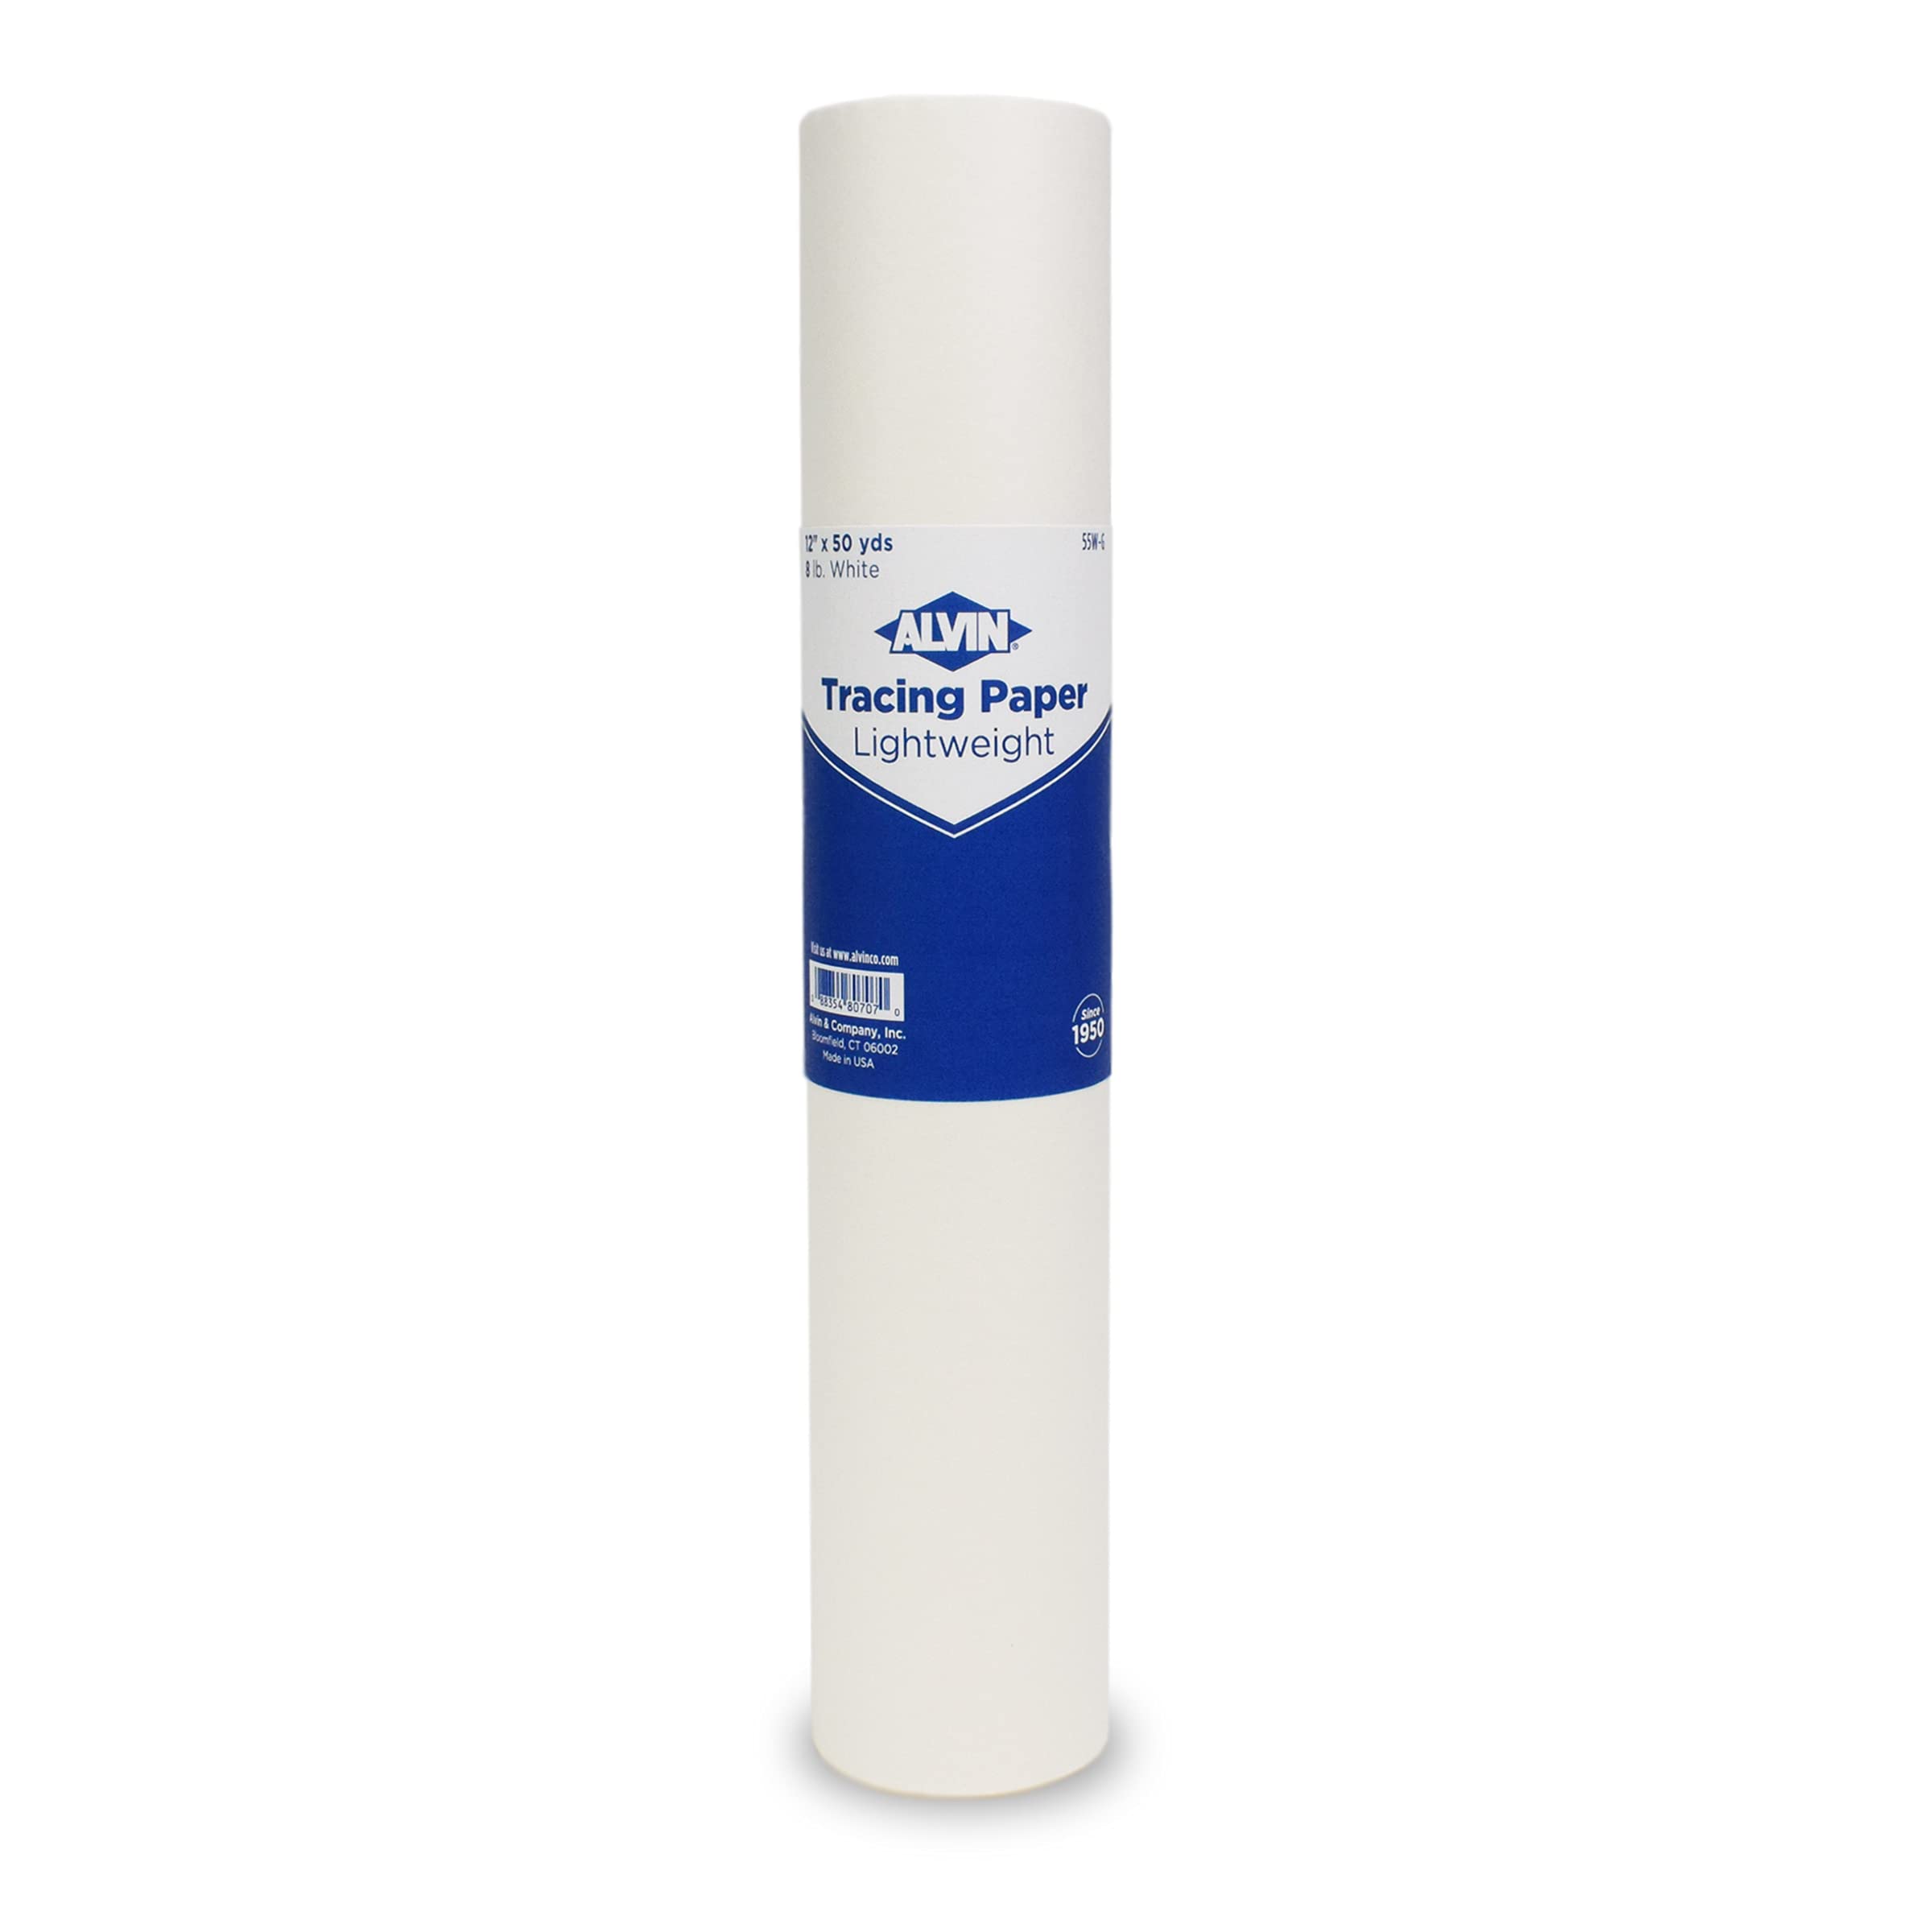 Book Cover ALVIN 55W-G Lightweight Tracing Paper Roll, White, Suitable with Ink, Charcoal, Felt Tip Pen, for Sketching or Detailing - 12 Inches, 50 Yards, 1-inch Core 12